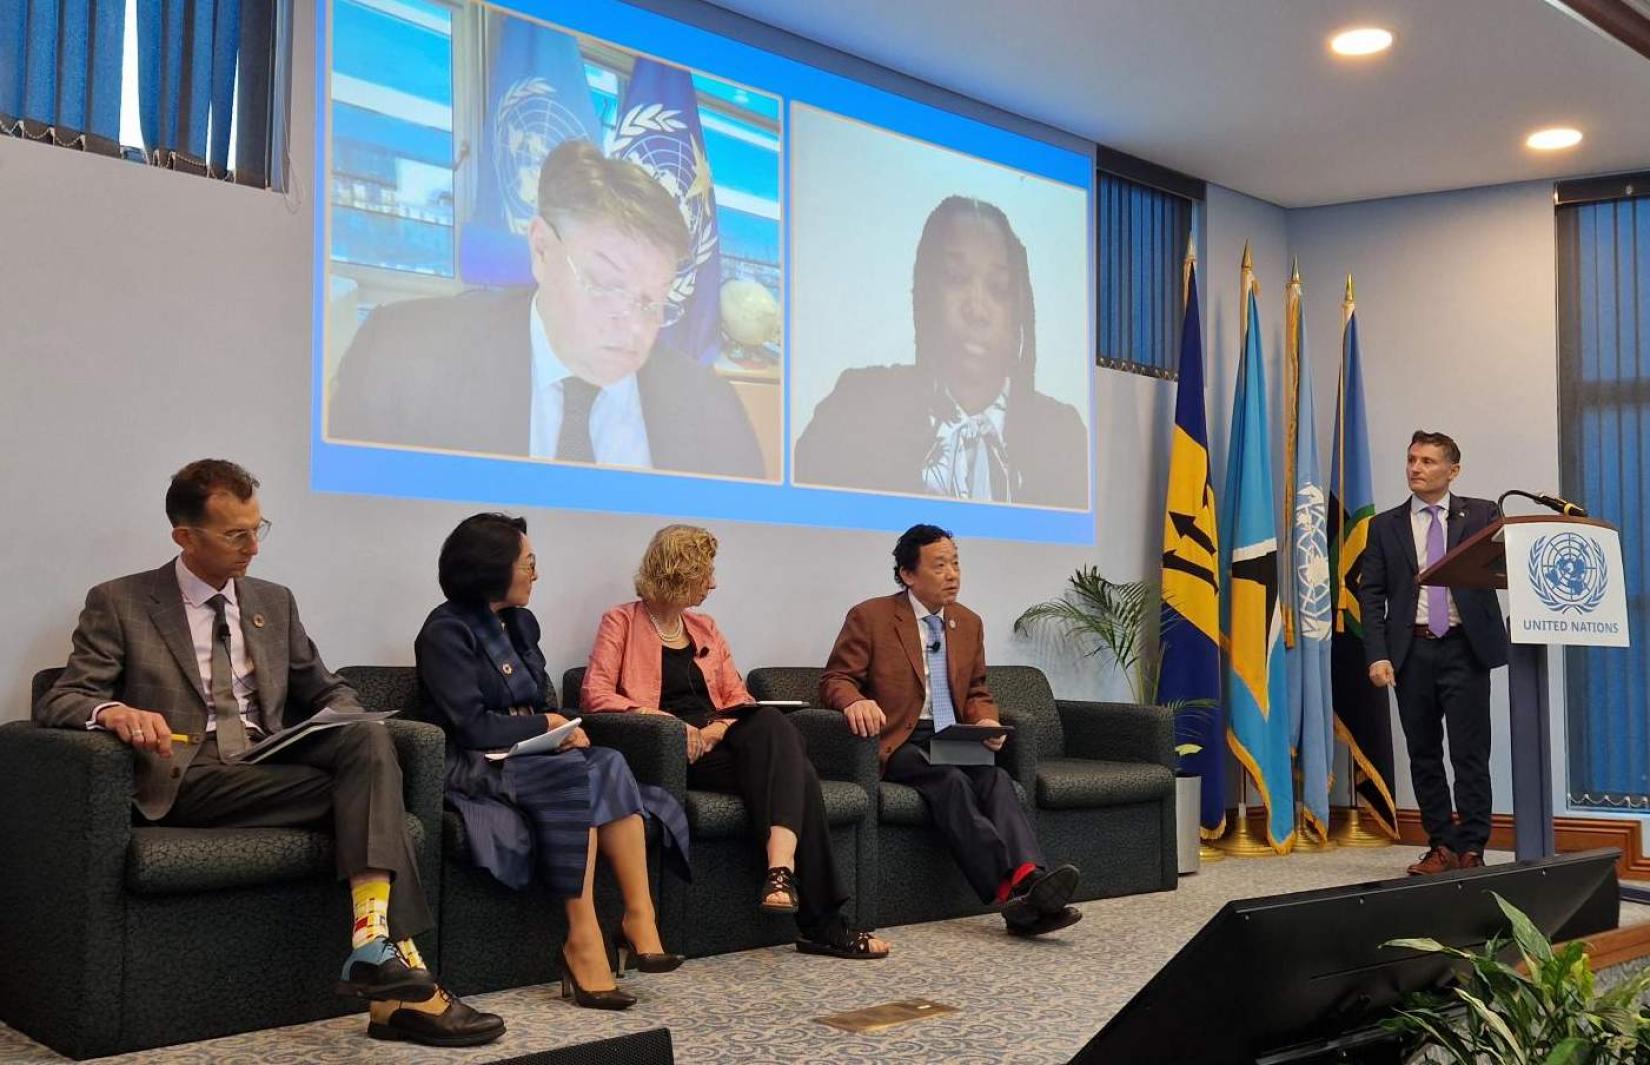 Panel discussion with Gerard Howe, Mami Mizutori, Inger Andersen and Qu Dongyu, with Petteri Taalas and Shajunee Gumbs via video link, moderated by UN Resident Coordinator Didier Trebucq